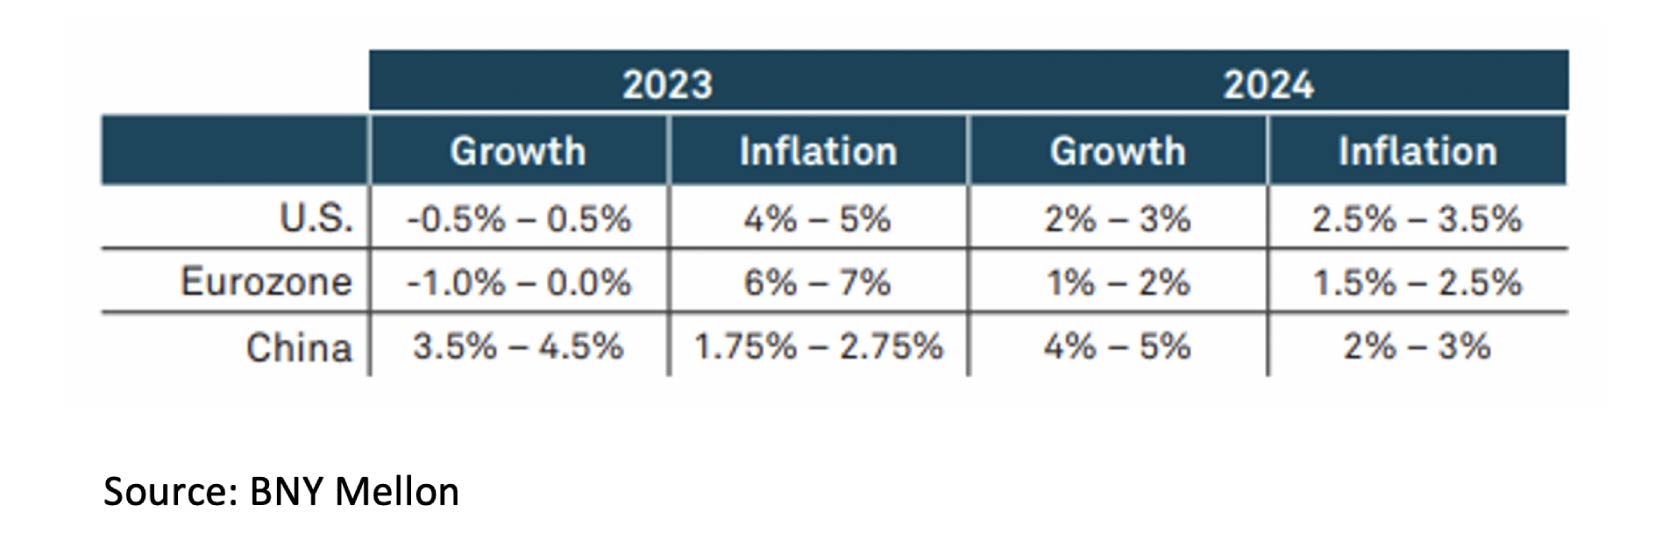 Growth and inflation in 2023 and 2024